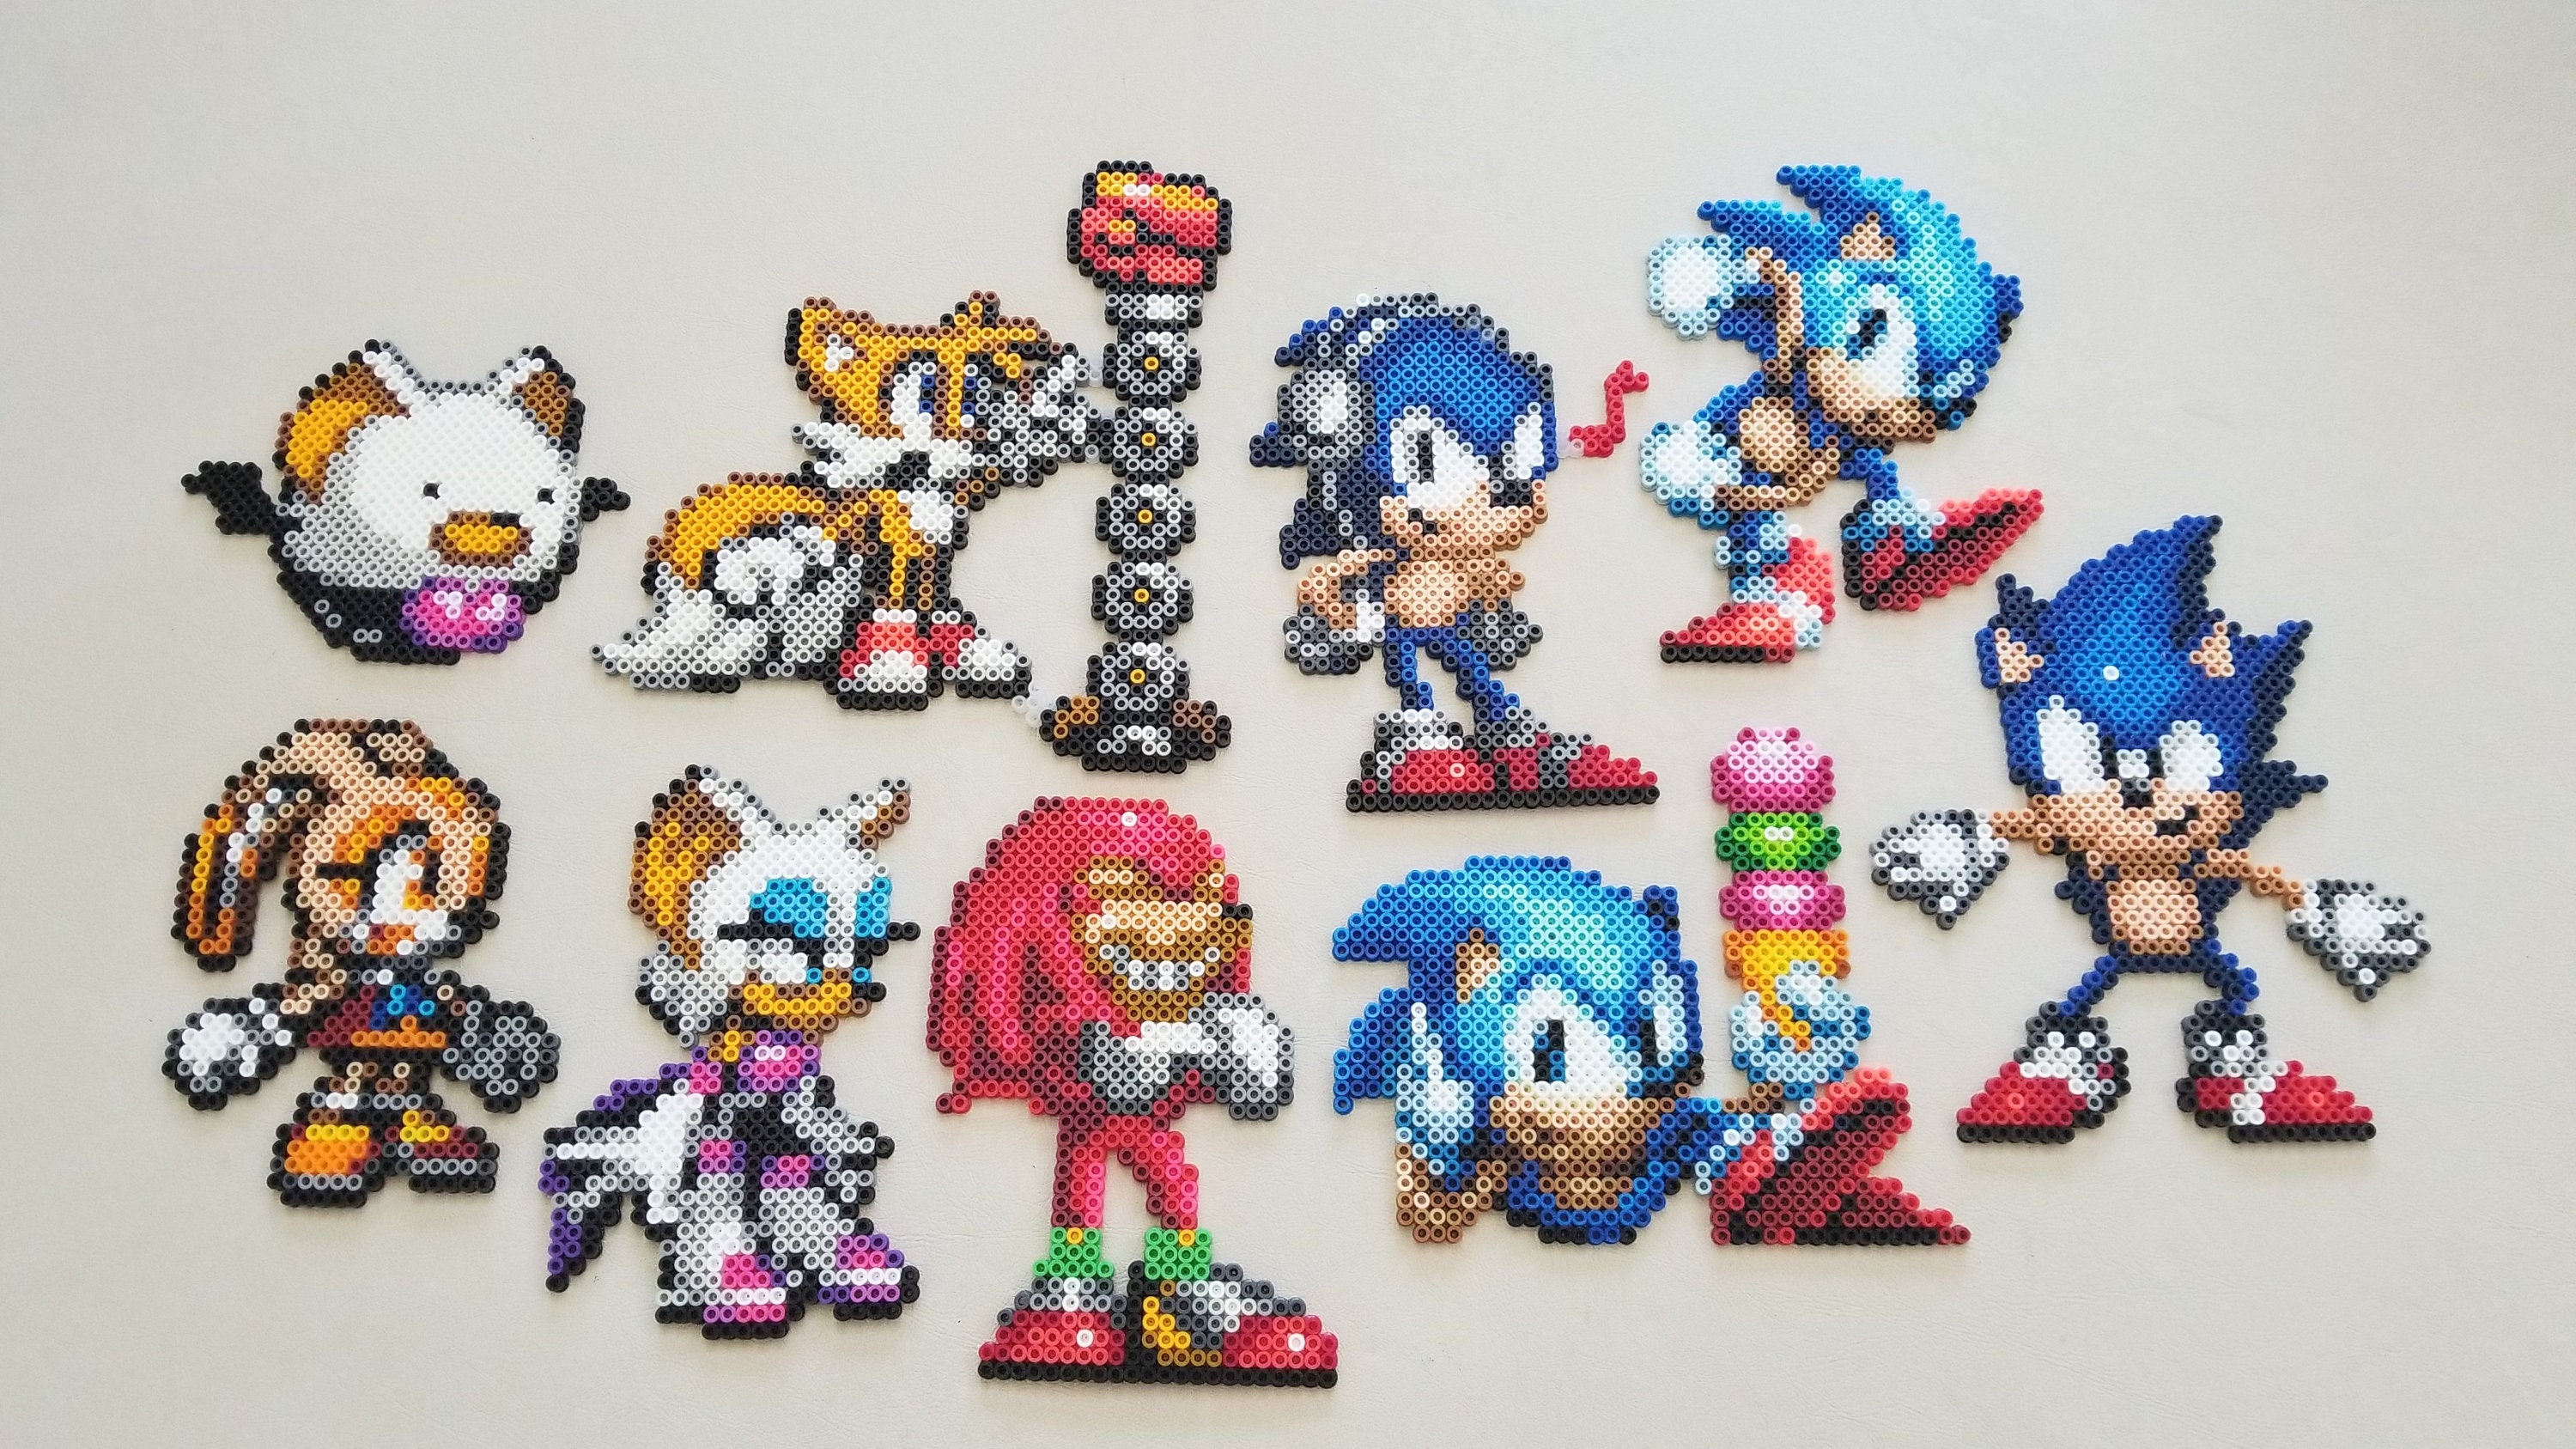 Pixilart - 50 Sonic Characters by Arcany